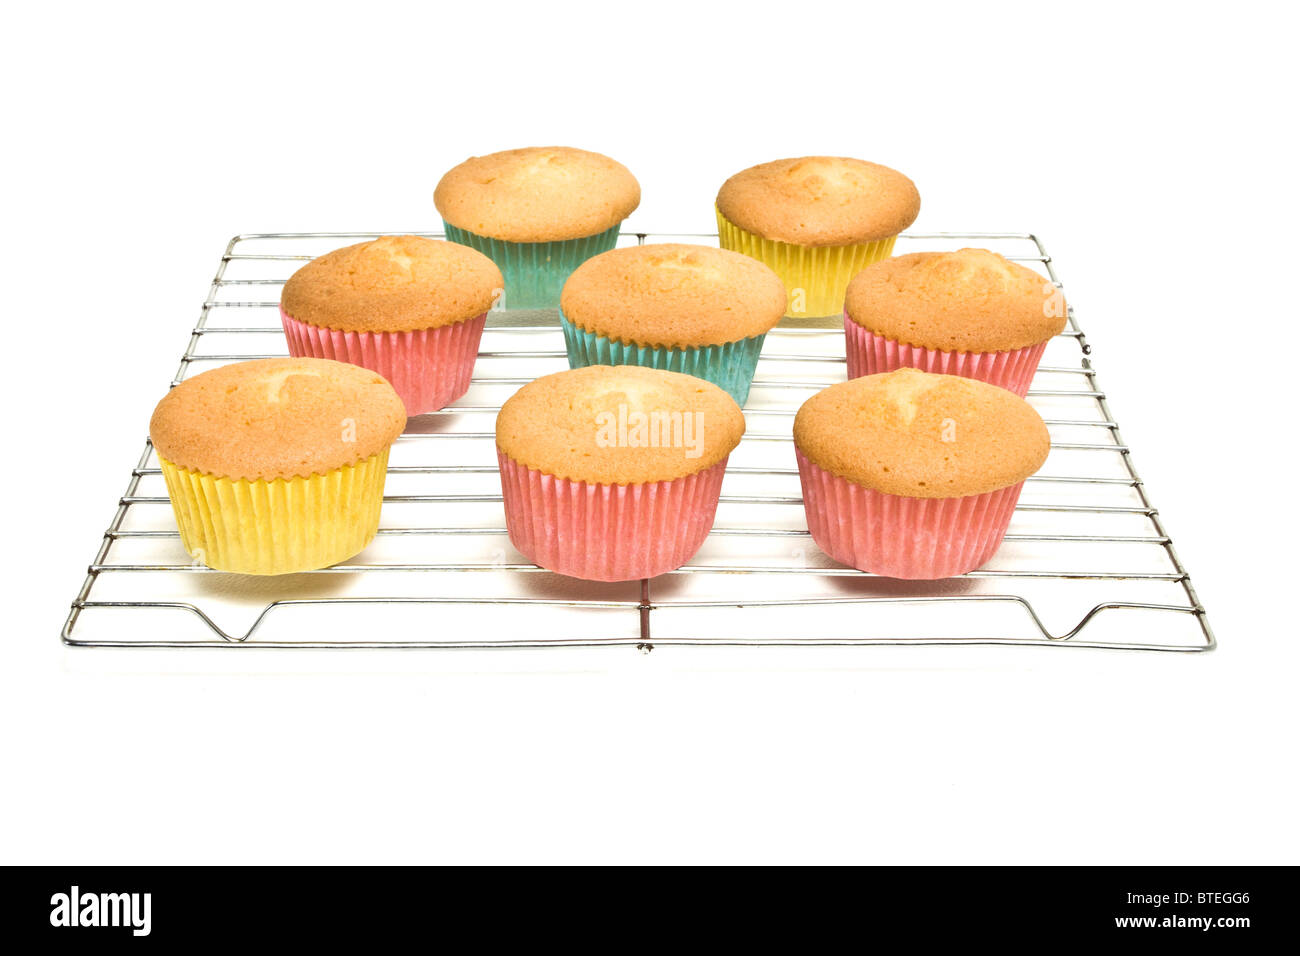 Home baked cupcakes cooling on wire mesh rack from low perspective isolated on white. Stock Photo